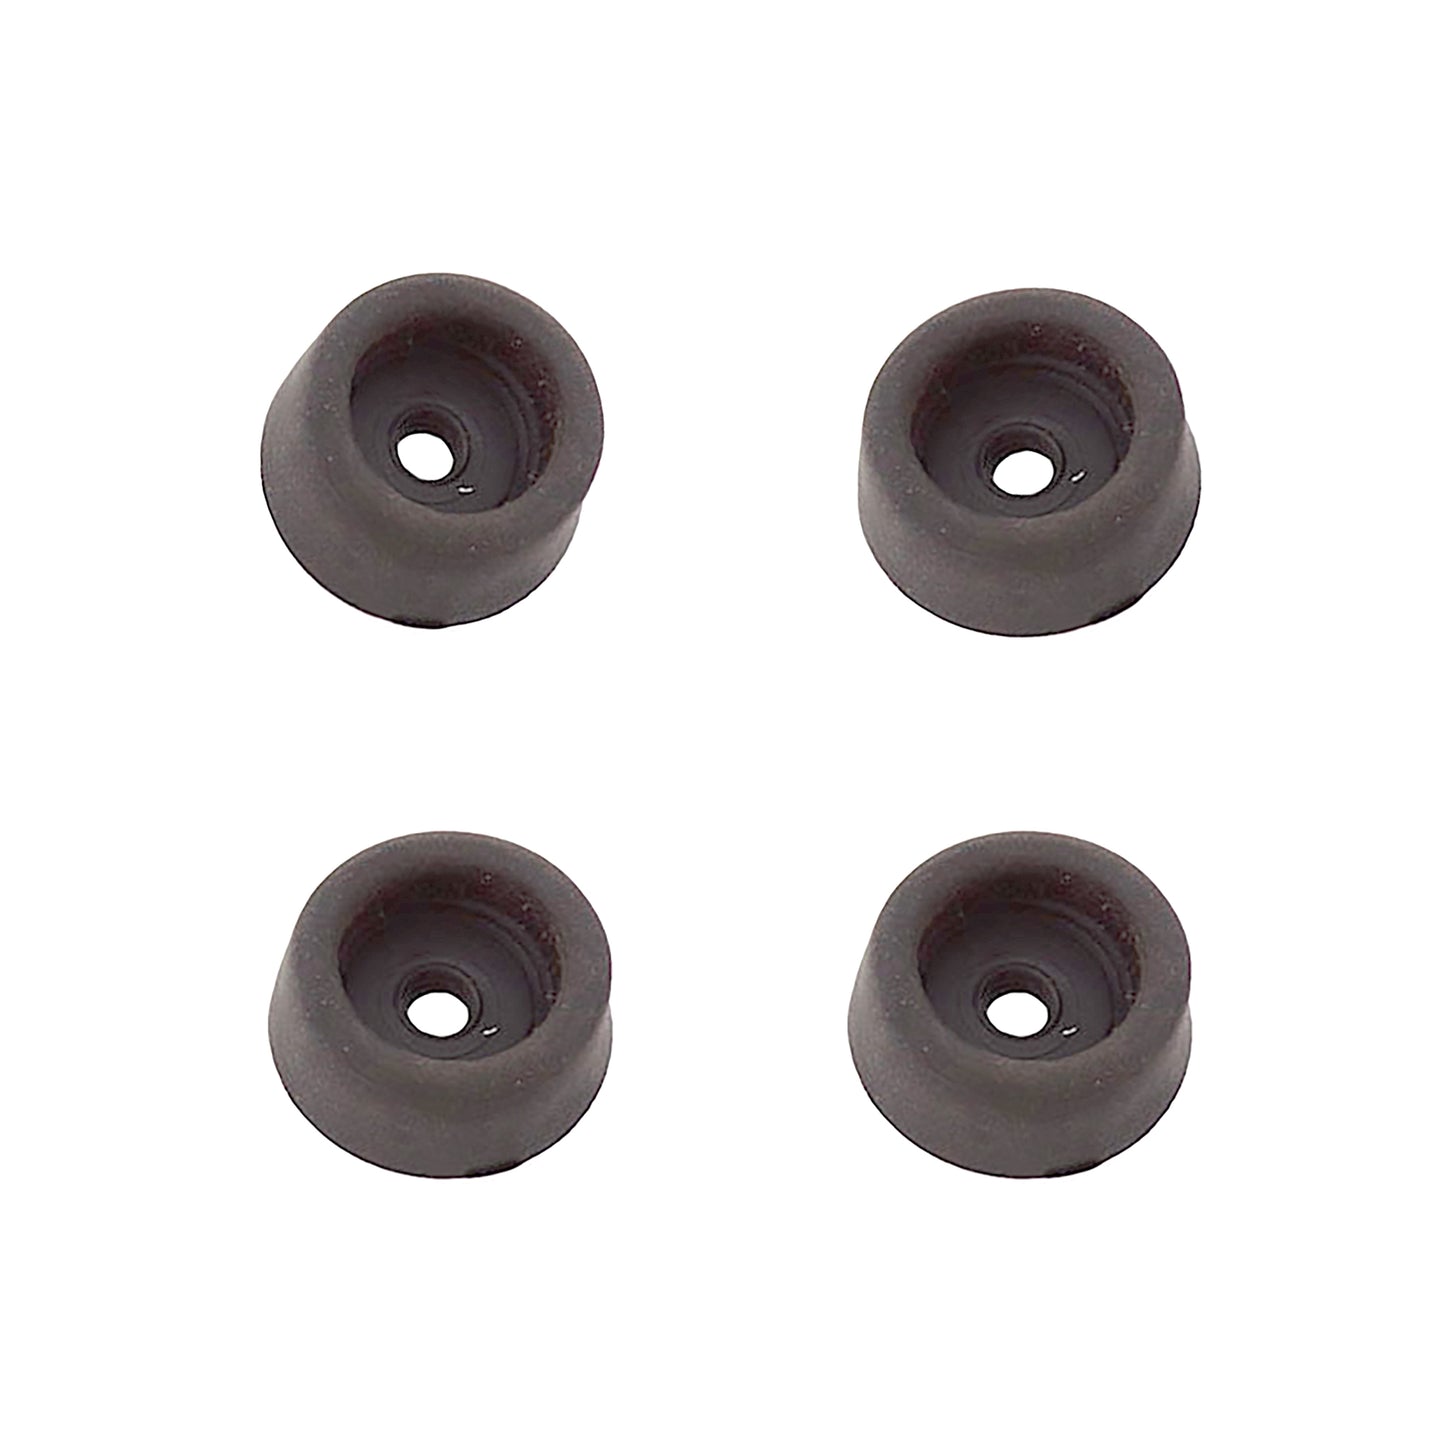 Rubber Feet for Standable Blower for BR-282A Inflatable Blower